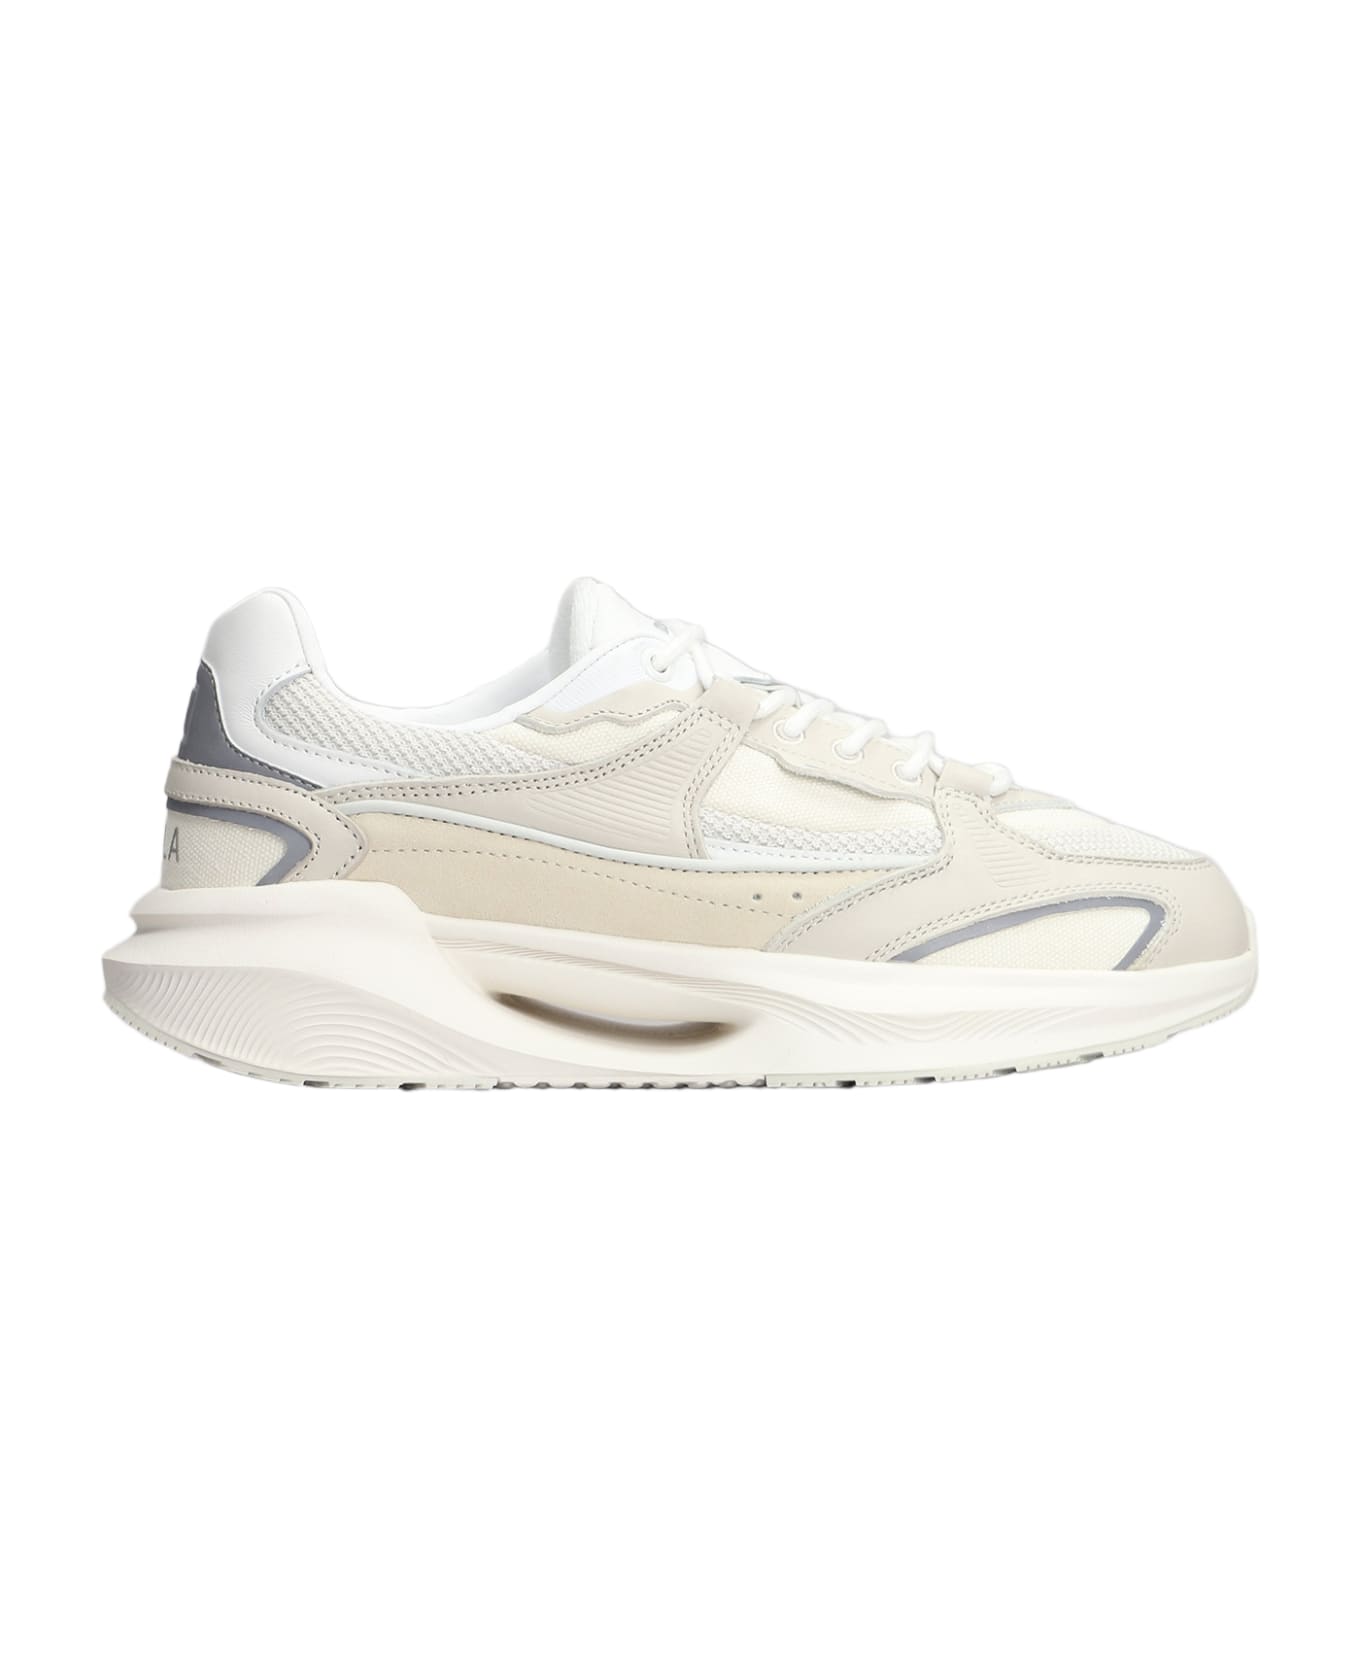 D.A.T.E. Vela Sneakers In Beige Leather And Fabric - beige